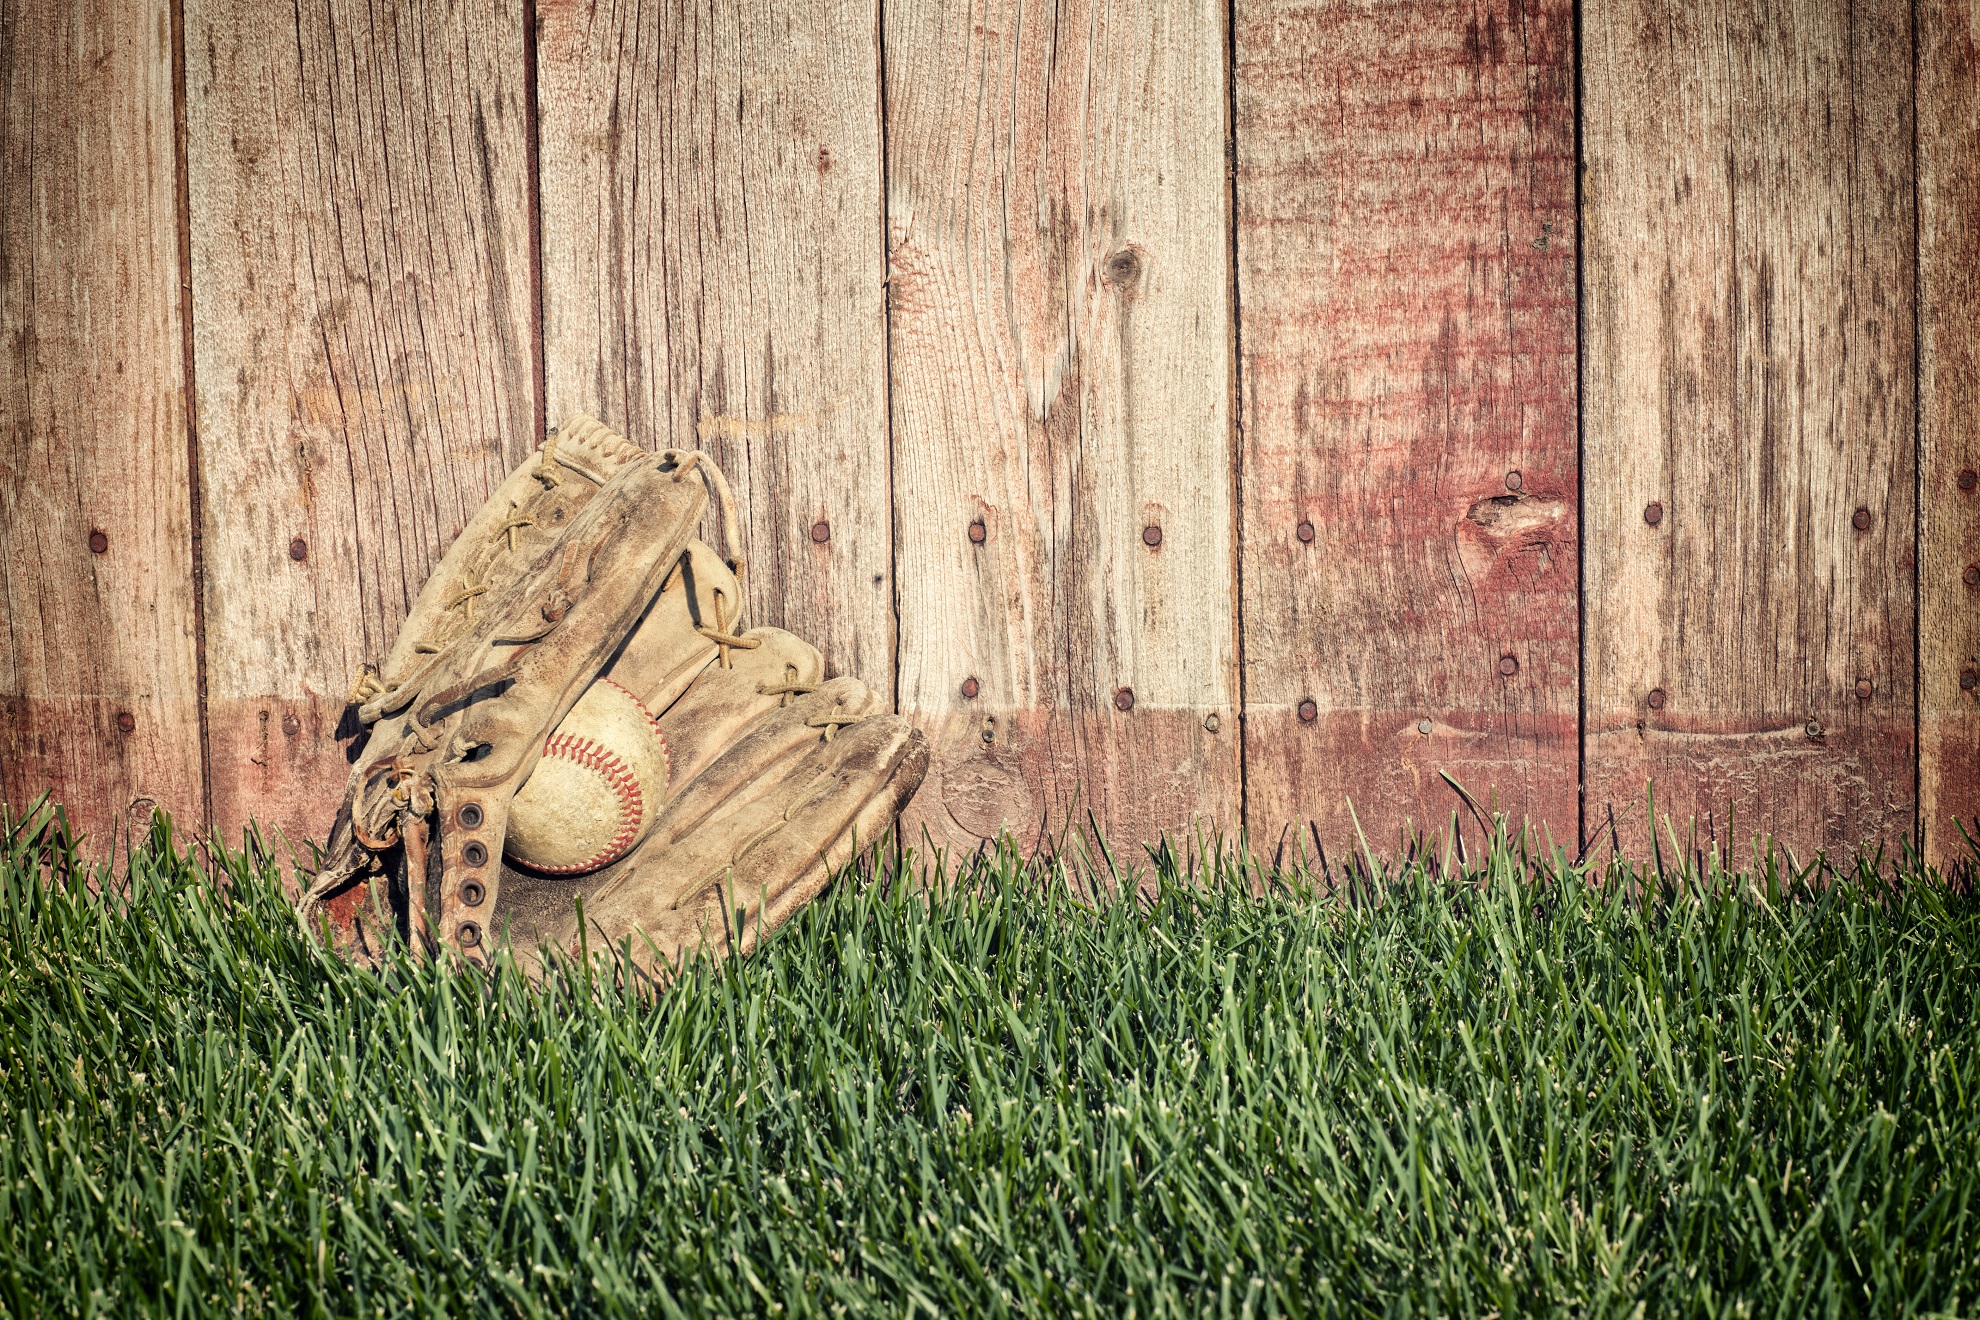 Old baseball mitt and ball on grass against wooden fence